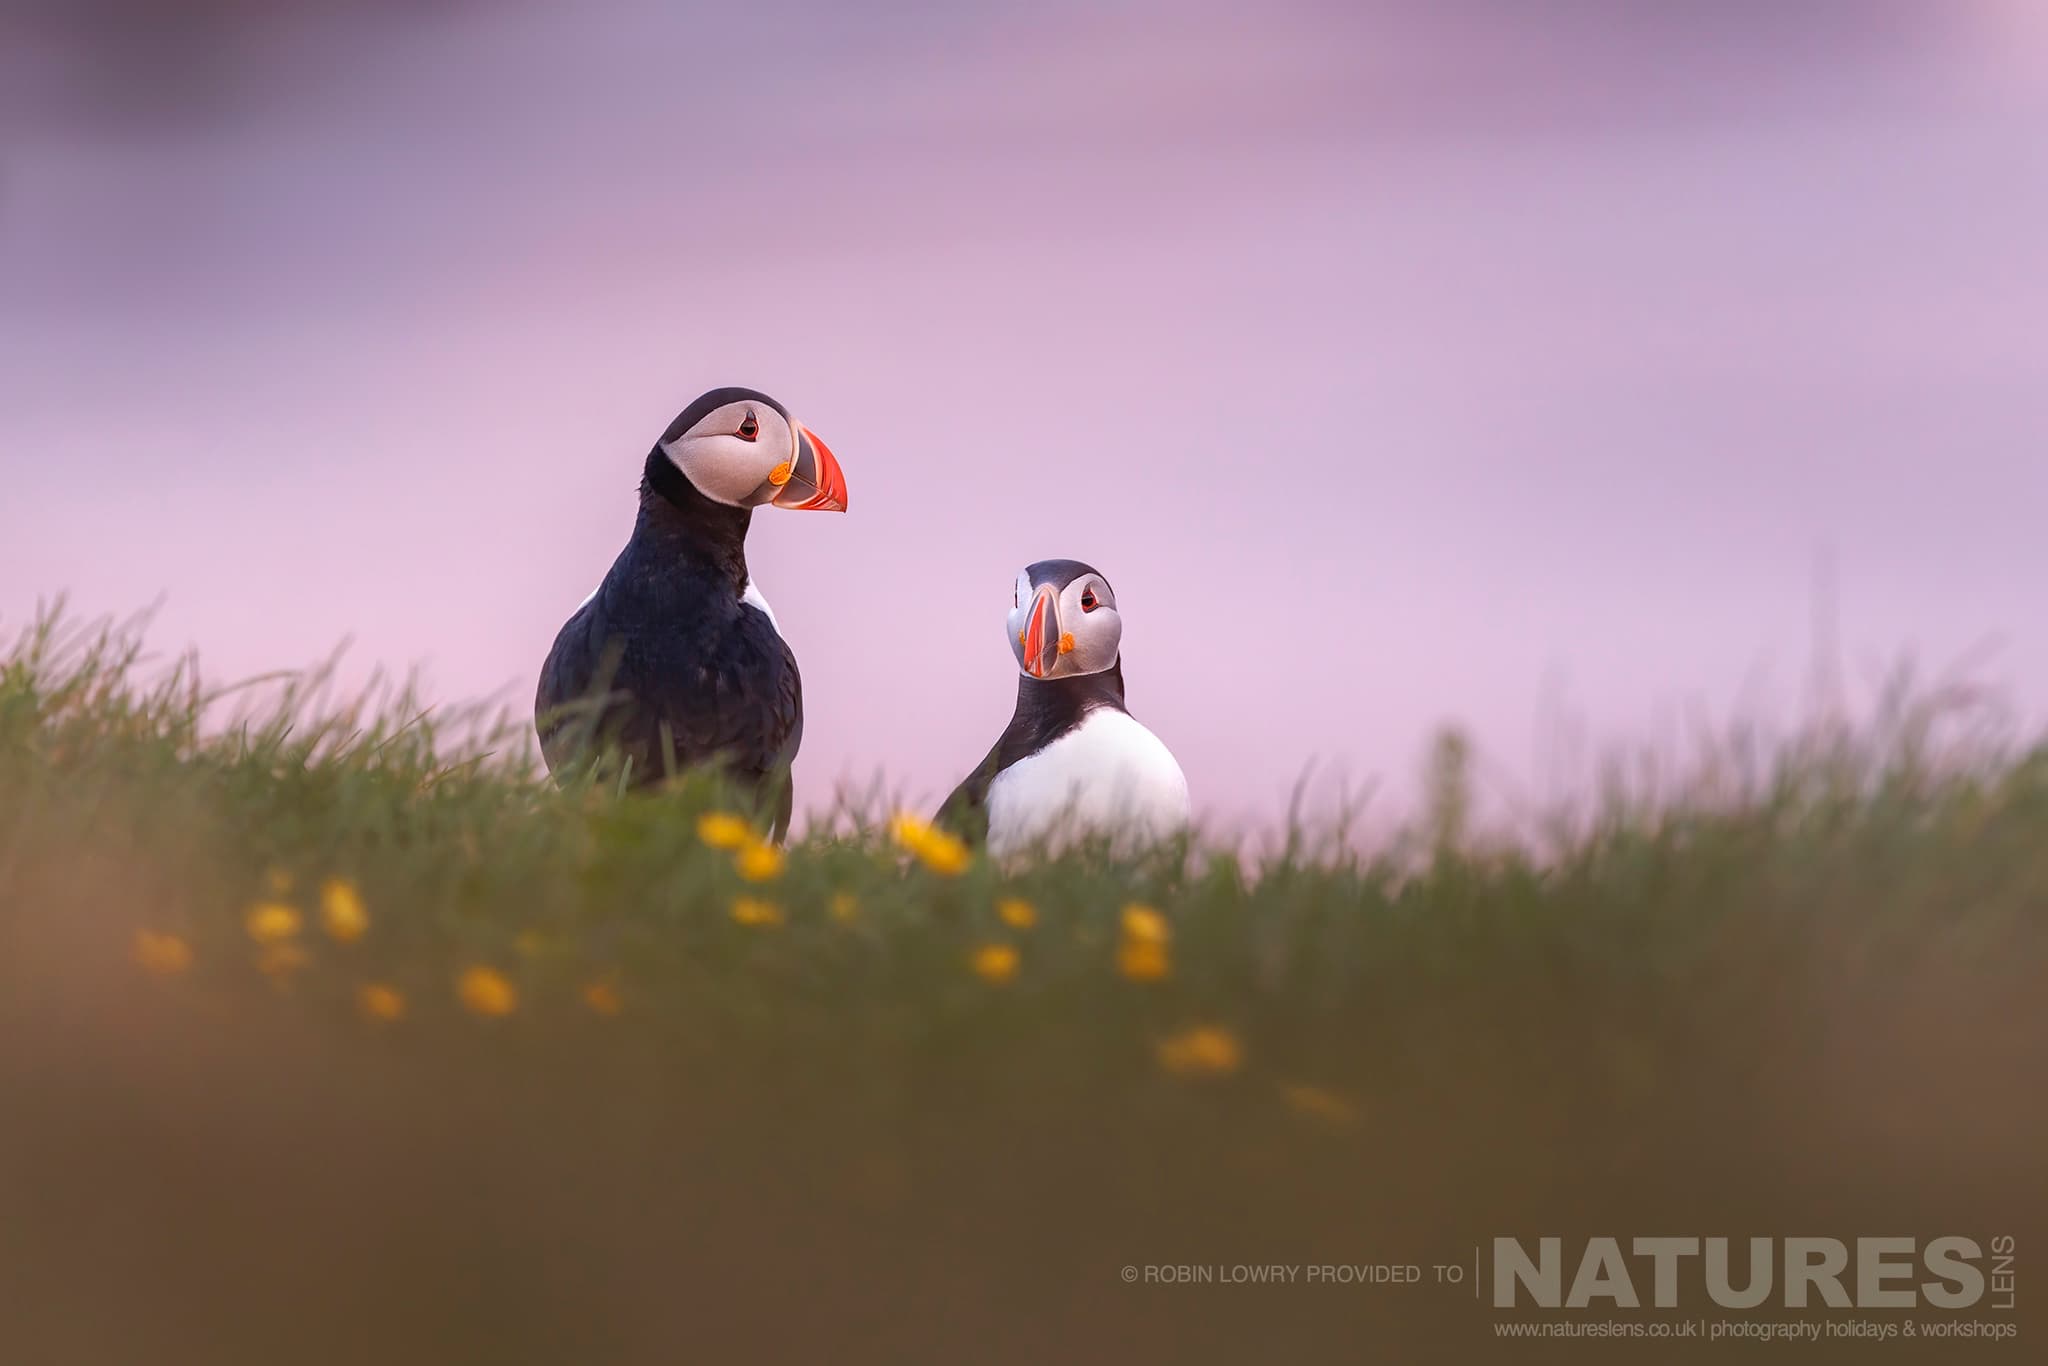 A Pair Of The Atlantic Puffins, Photographed In Their Natural Habitat On Grímsey Island, Iceland